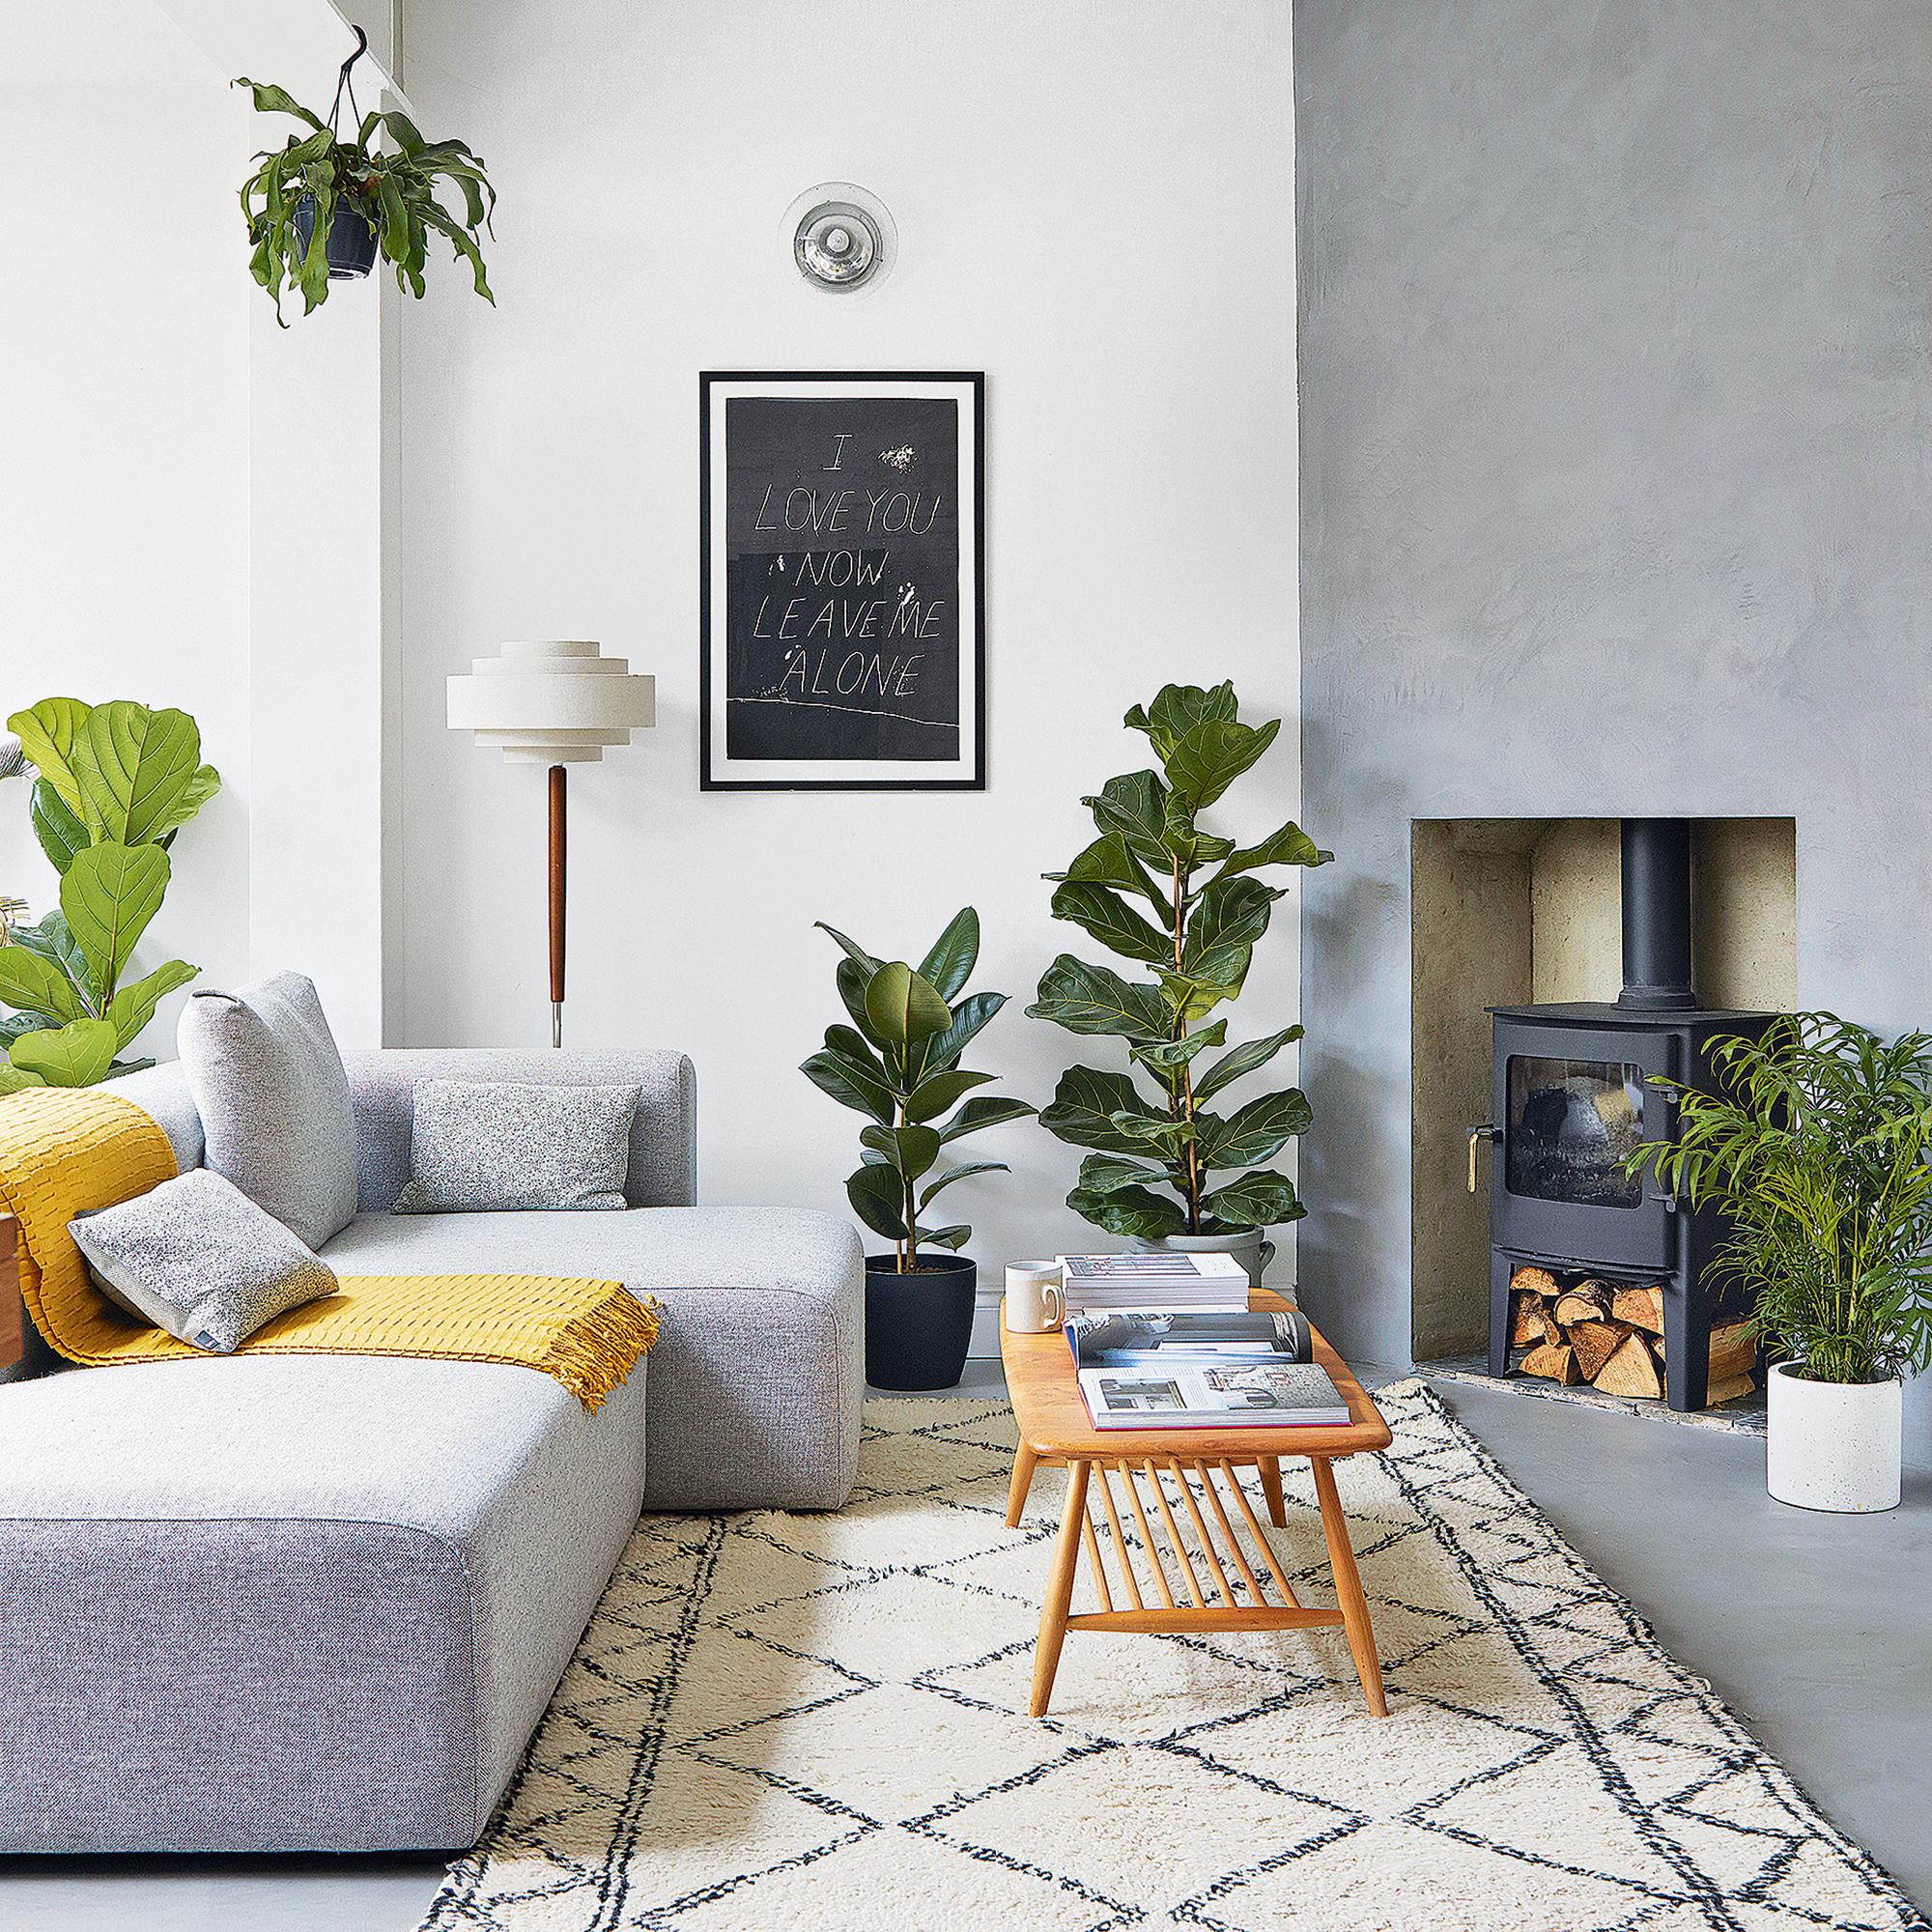 Grey living room with yellow throw, berber rug and potted plants